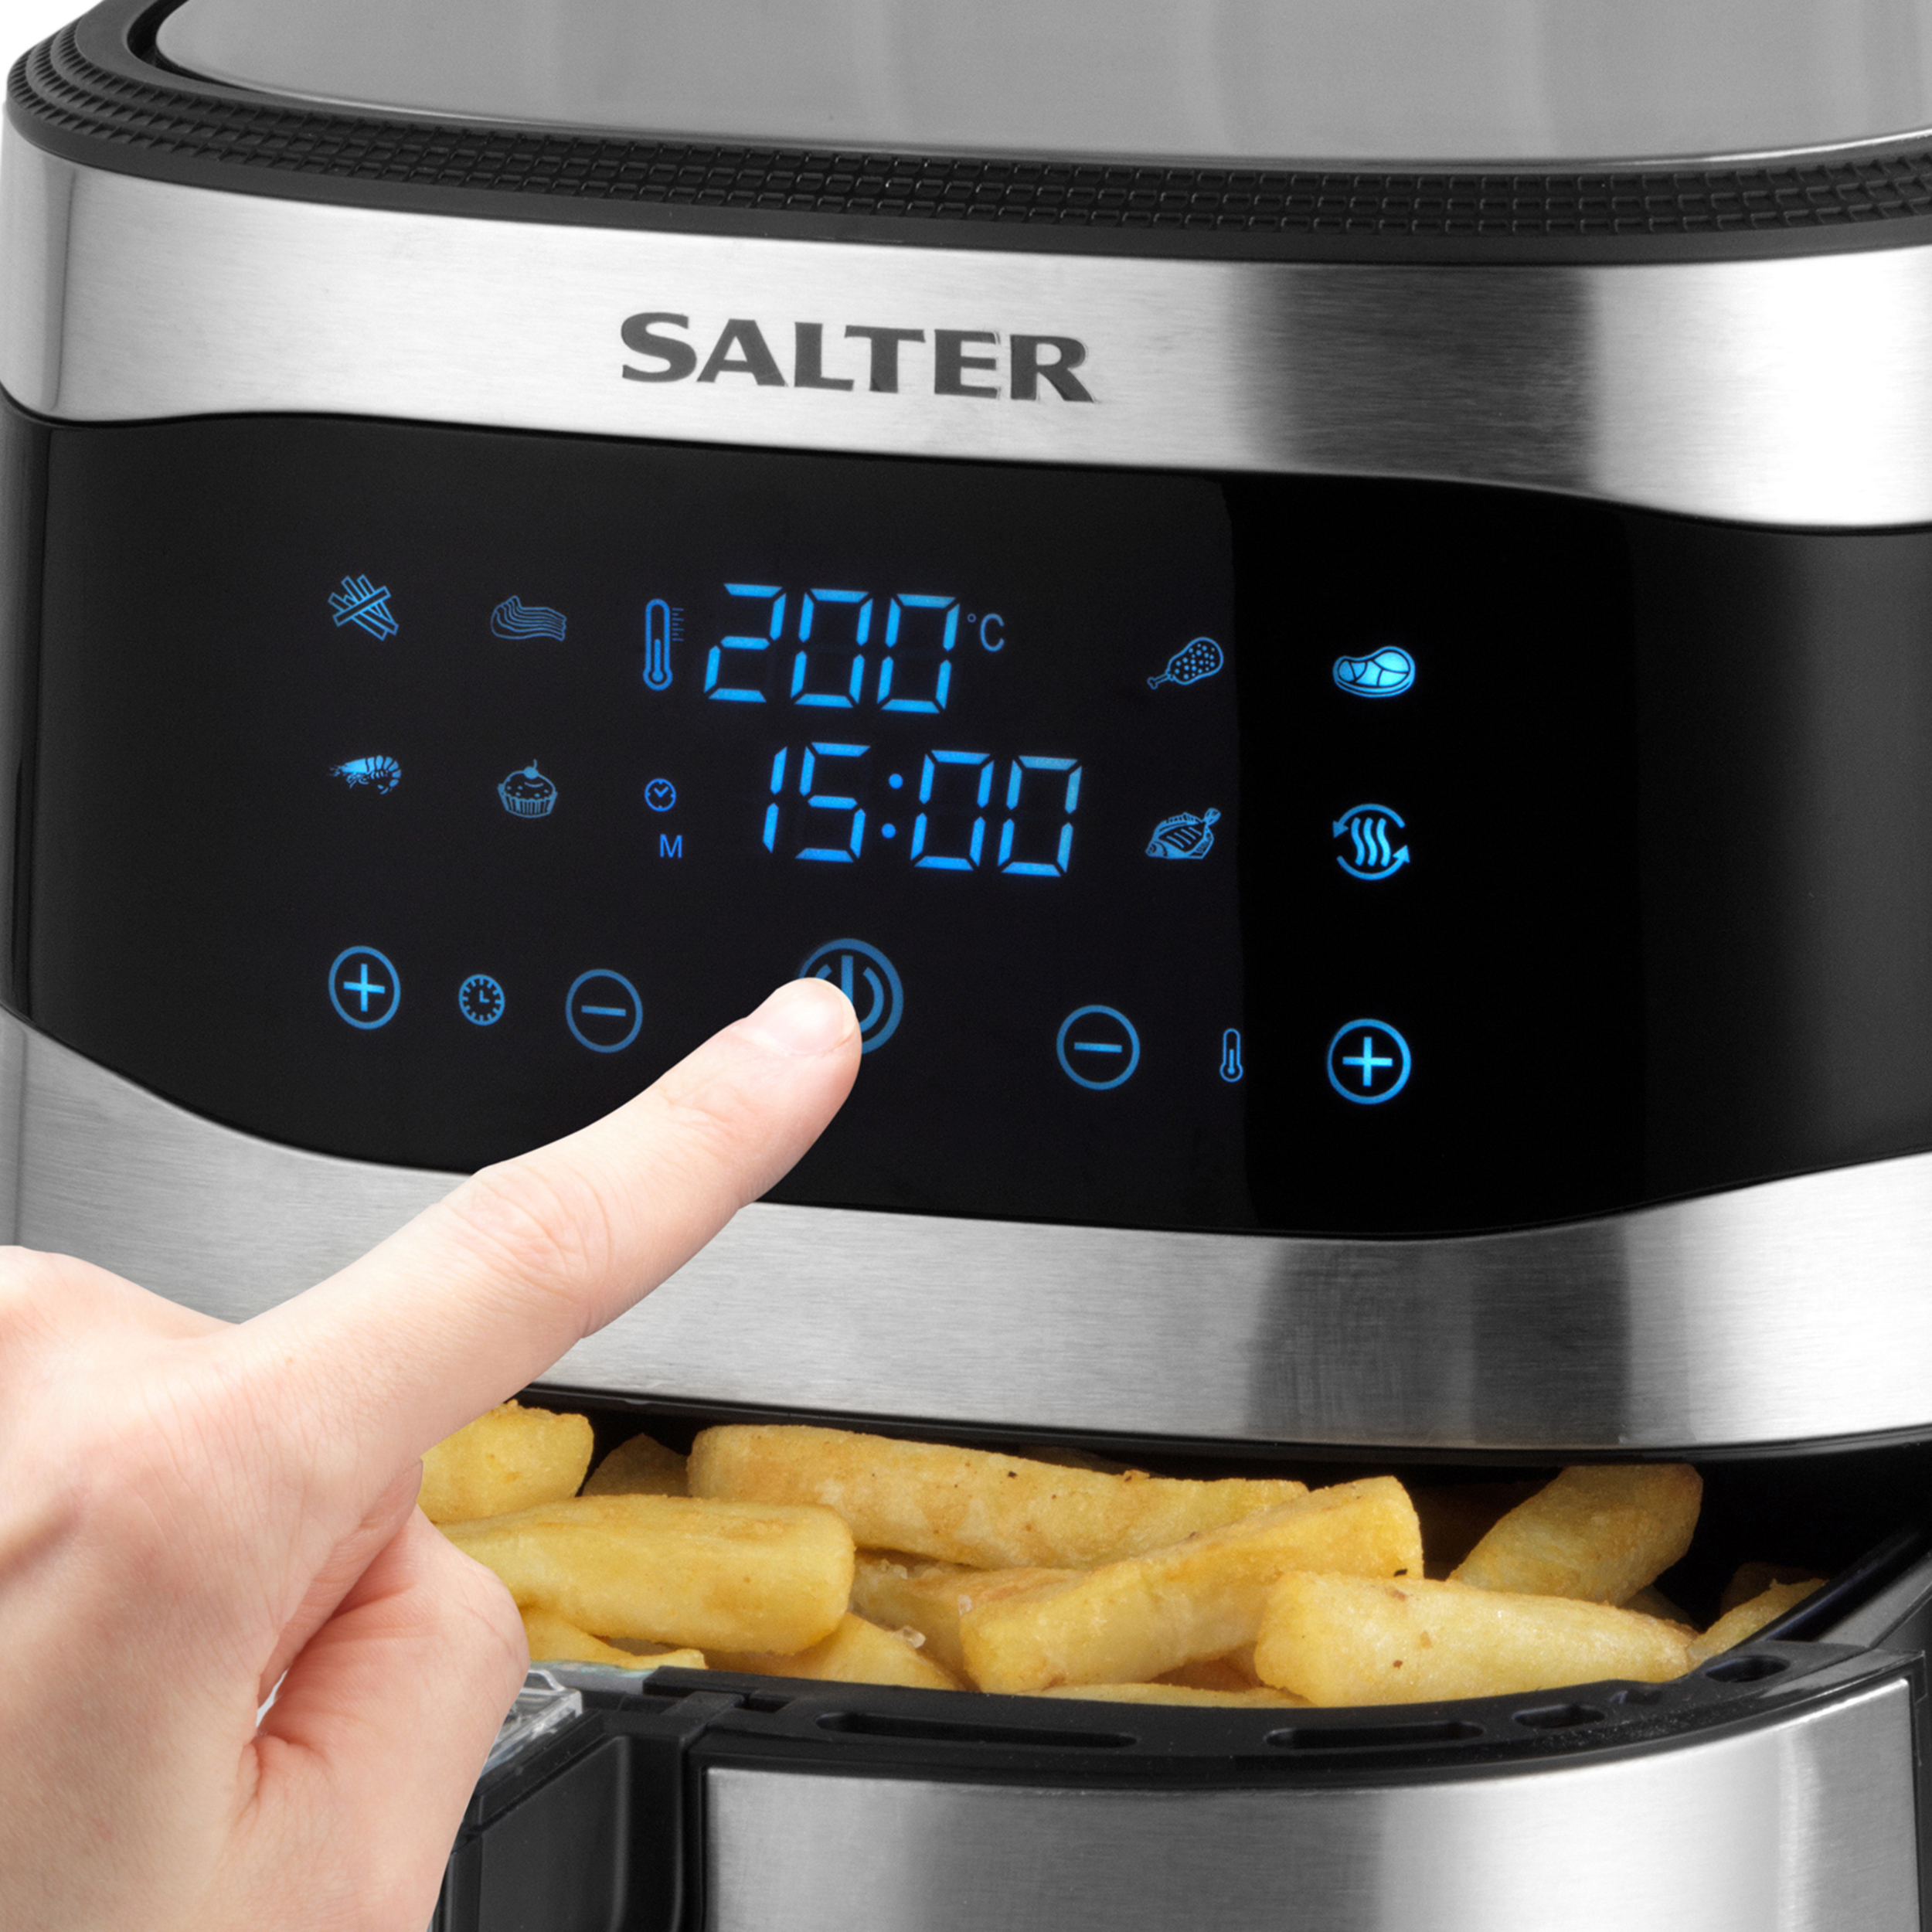 Someone turning on a A Salter Go healthy XXL Hot Air fryer